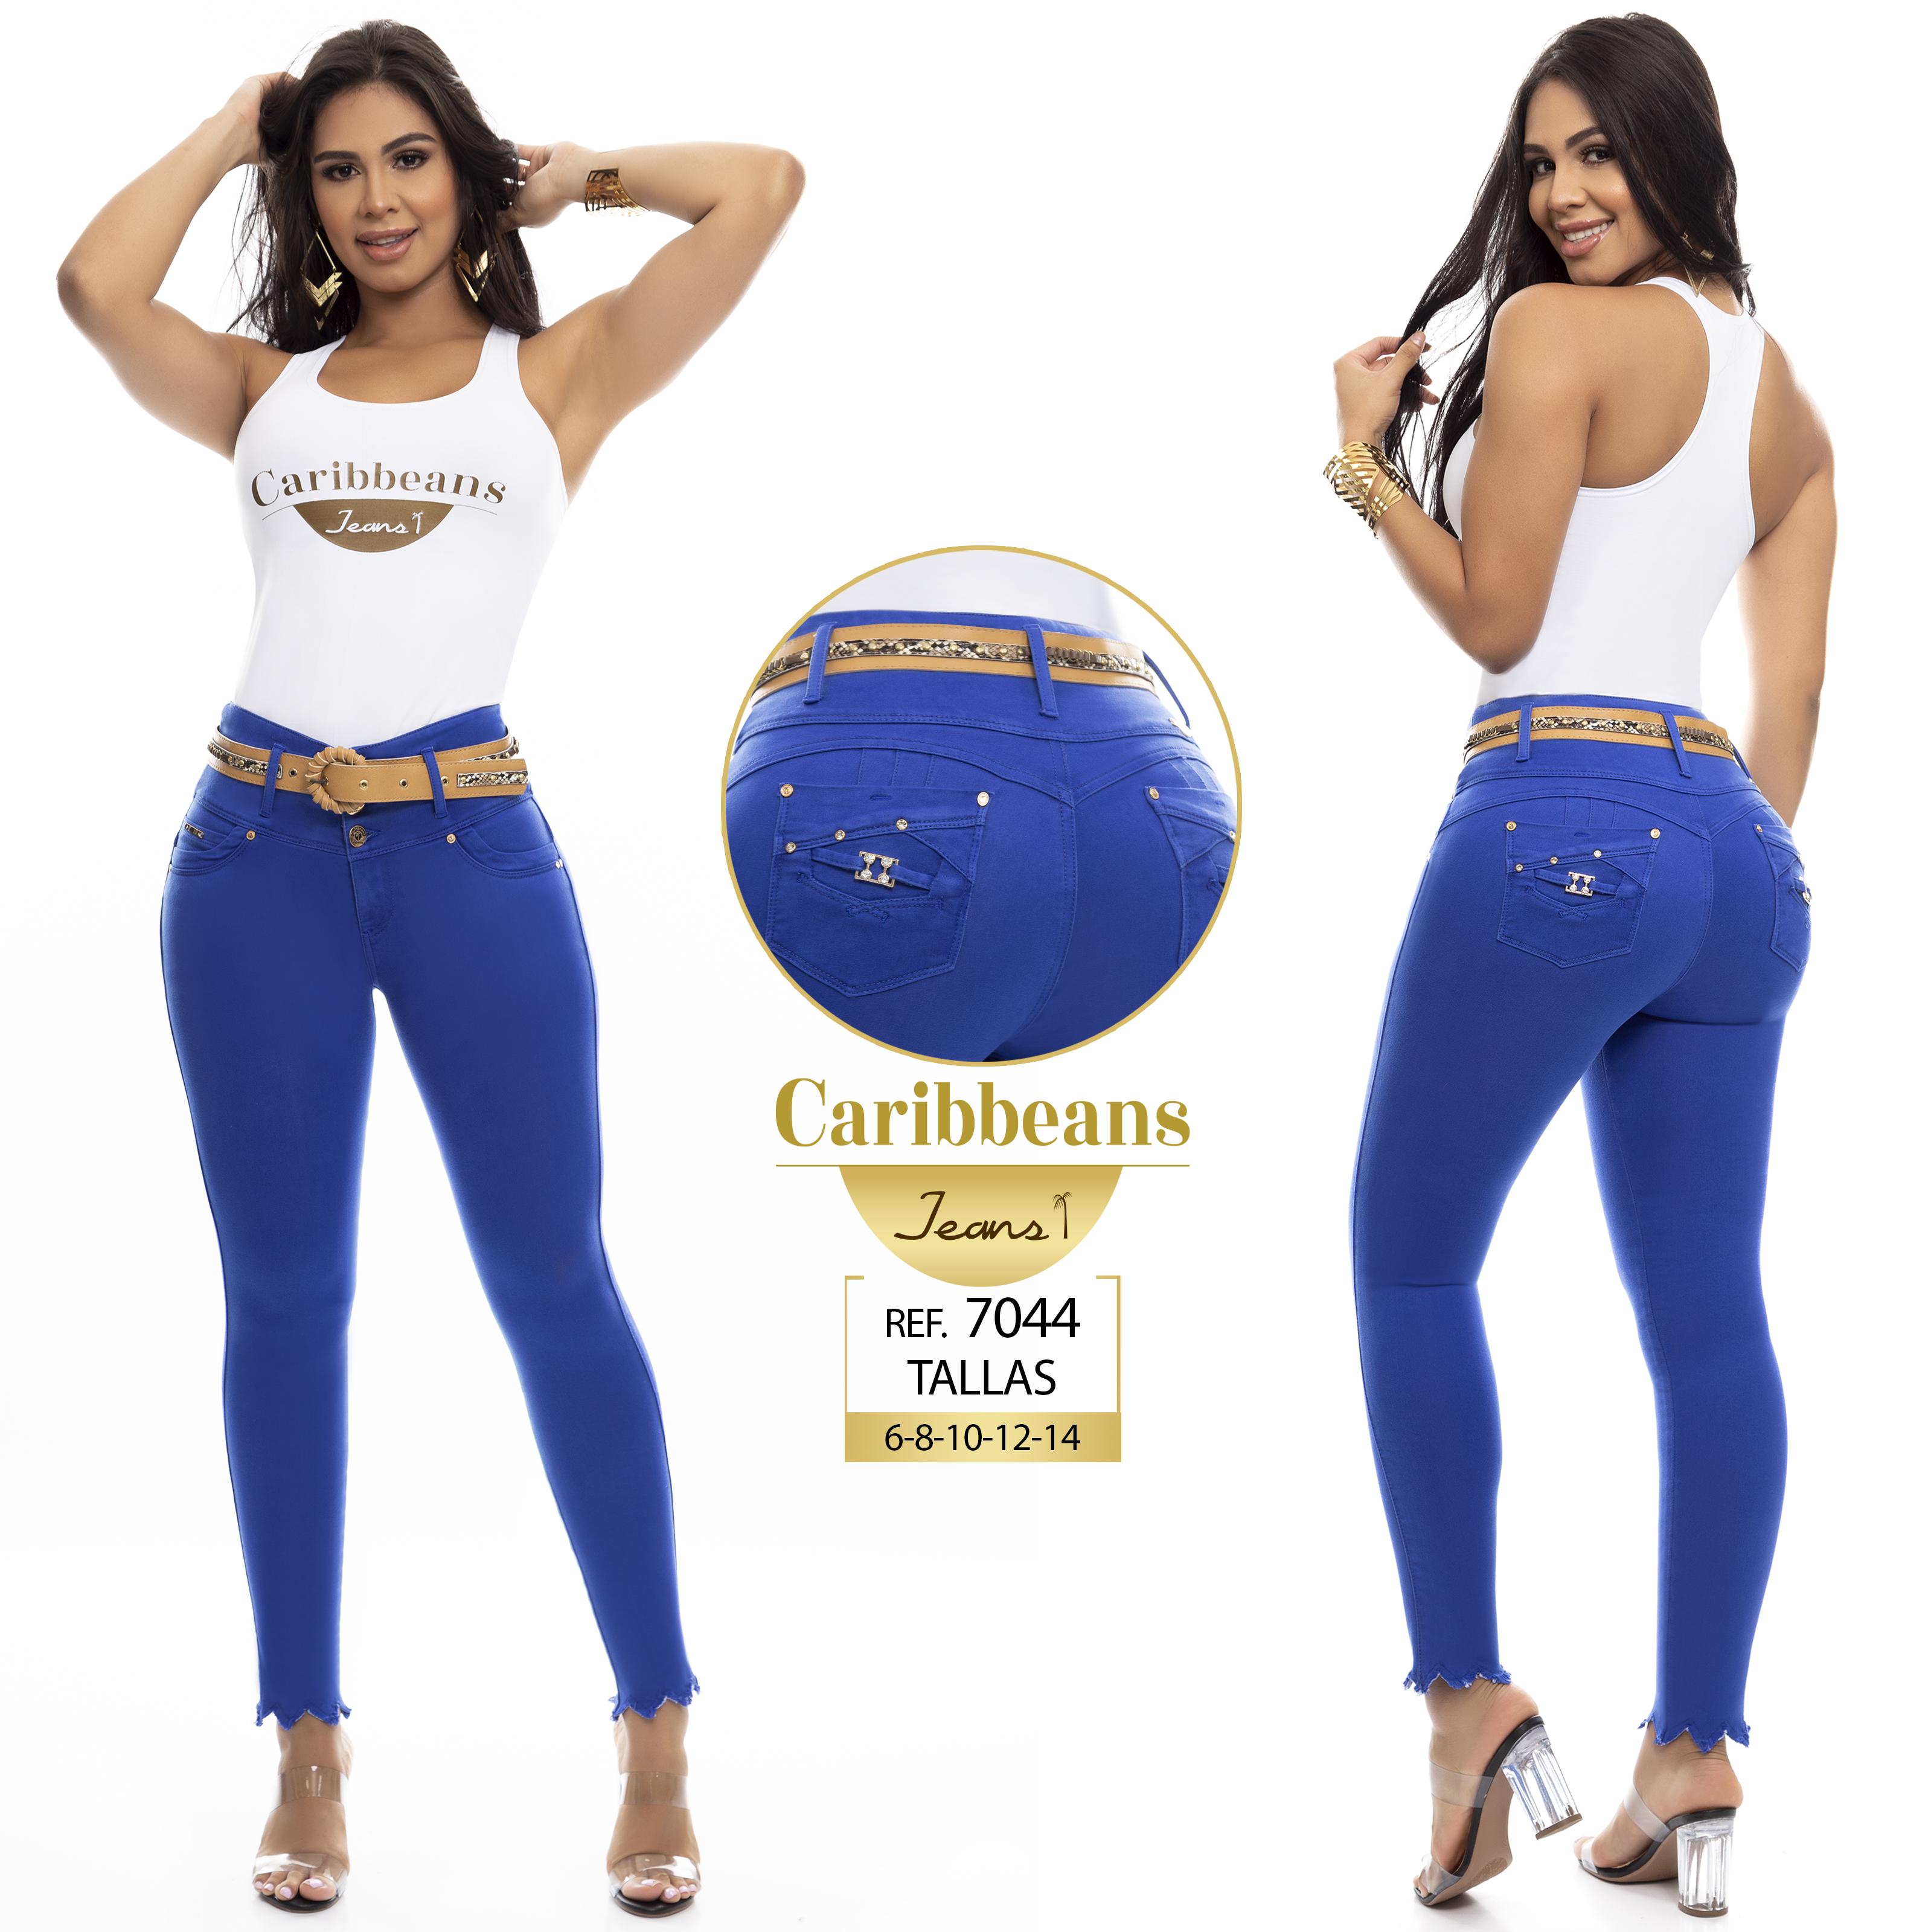 Jean colombiano Push up